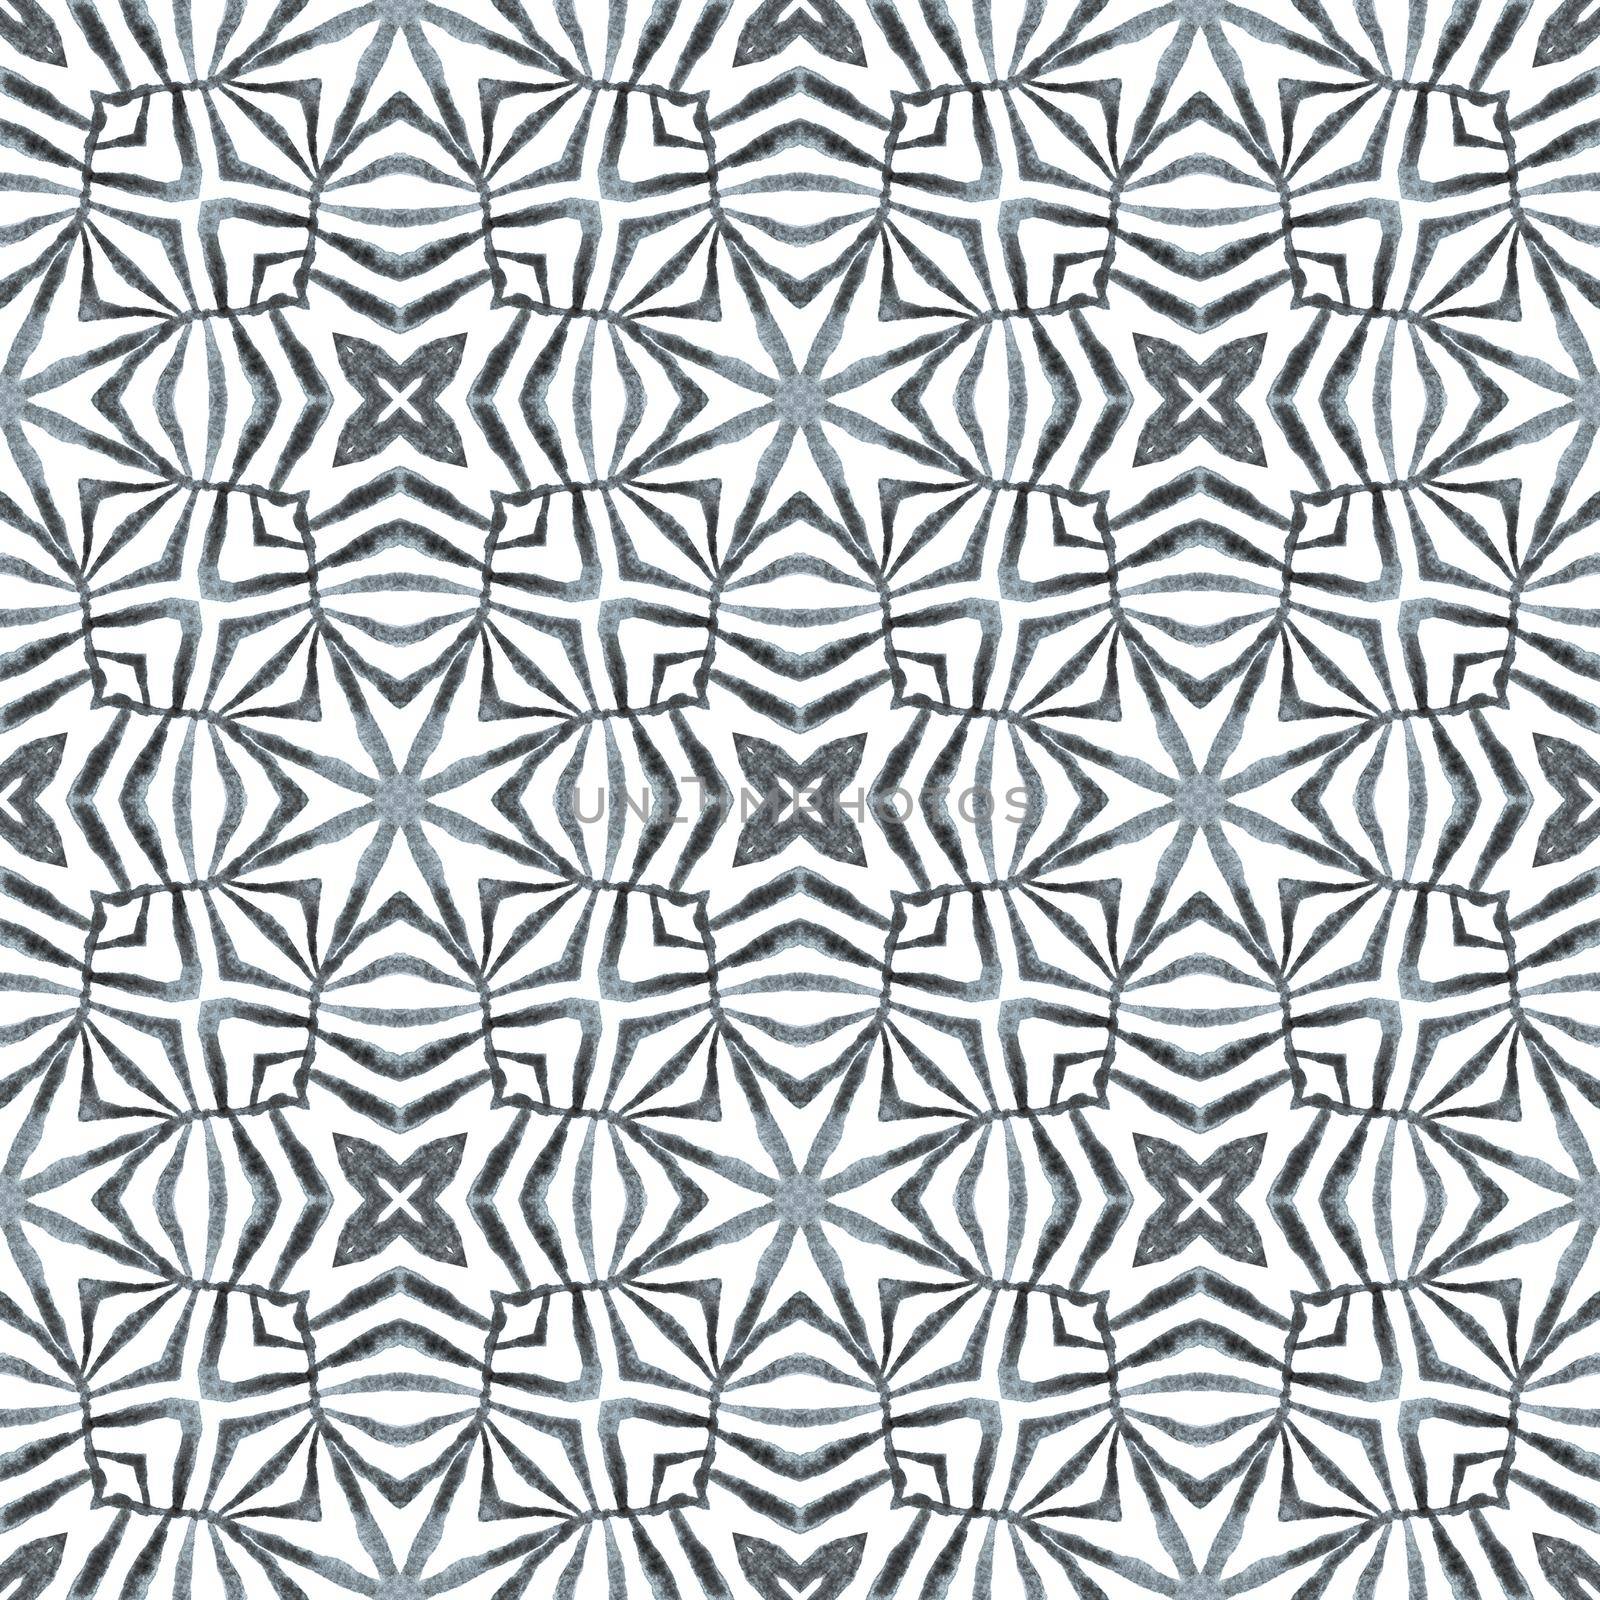 Watercolor medallion seamless border. Black and white mind-blowing boho chic summer design. Medallion seamless pattern. Textile ready captivating print, swimwear fabric, wallpaper, wrapping.